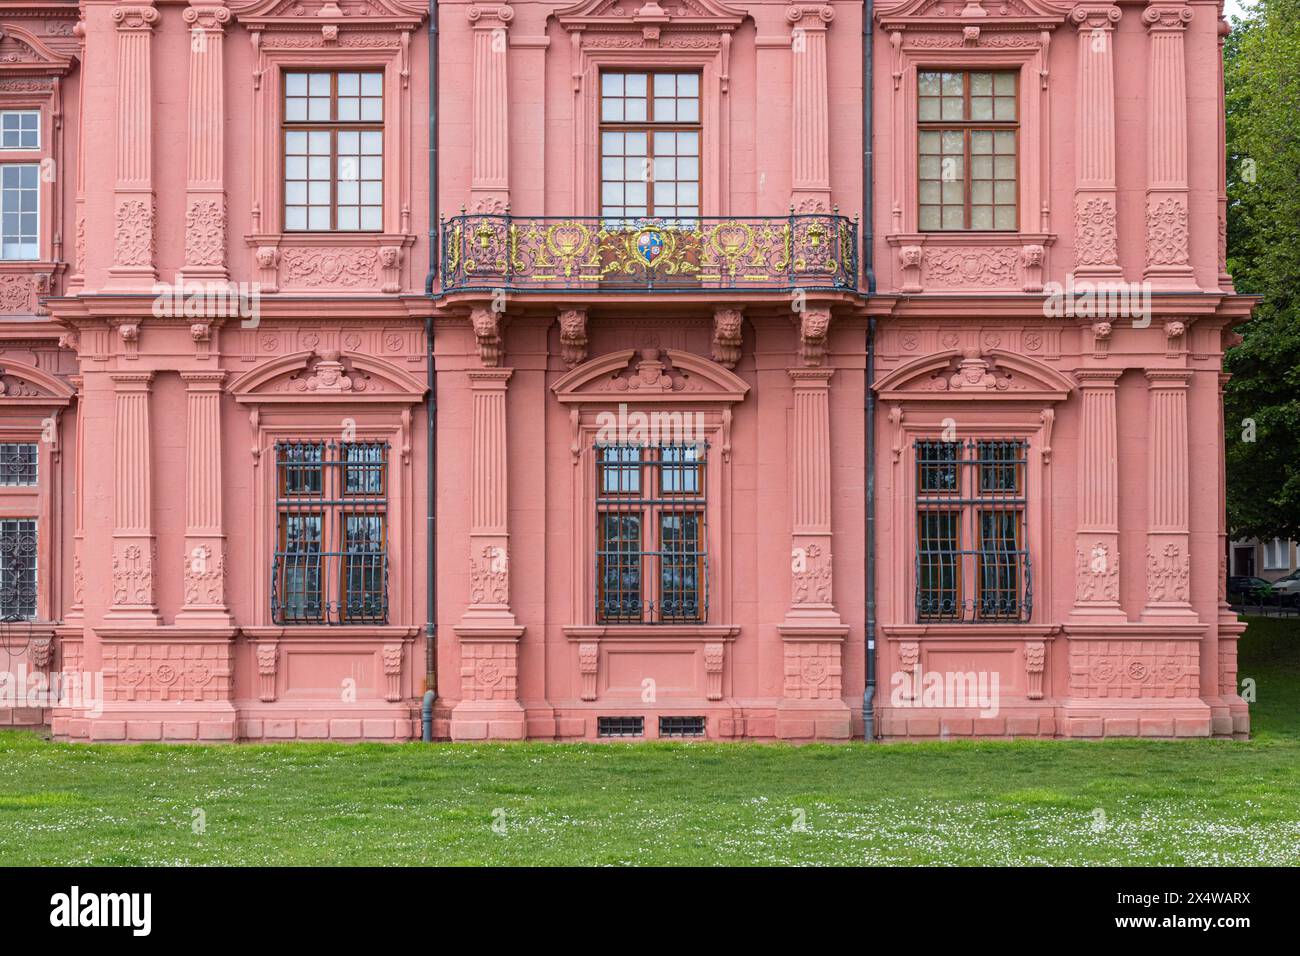 Facade of the Electoral Palace of Mainz, an important example of renaissance architecture in Germany. Stock Photo